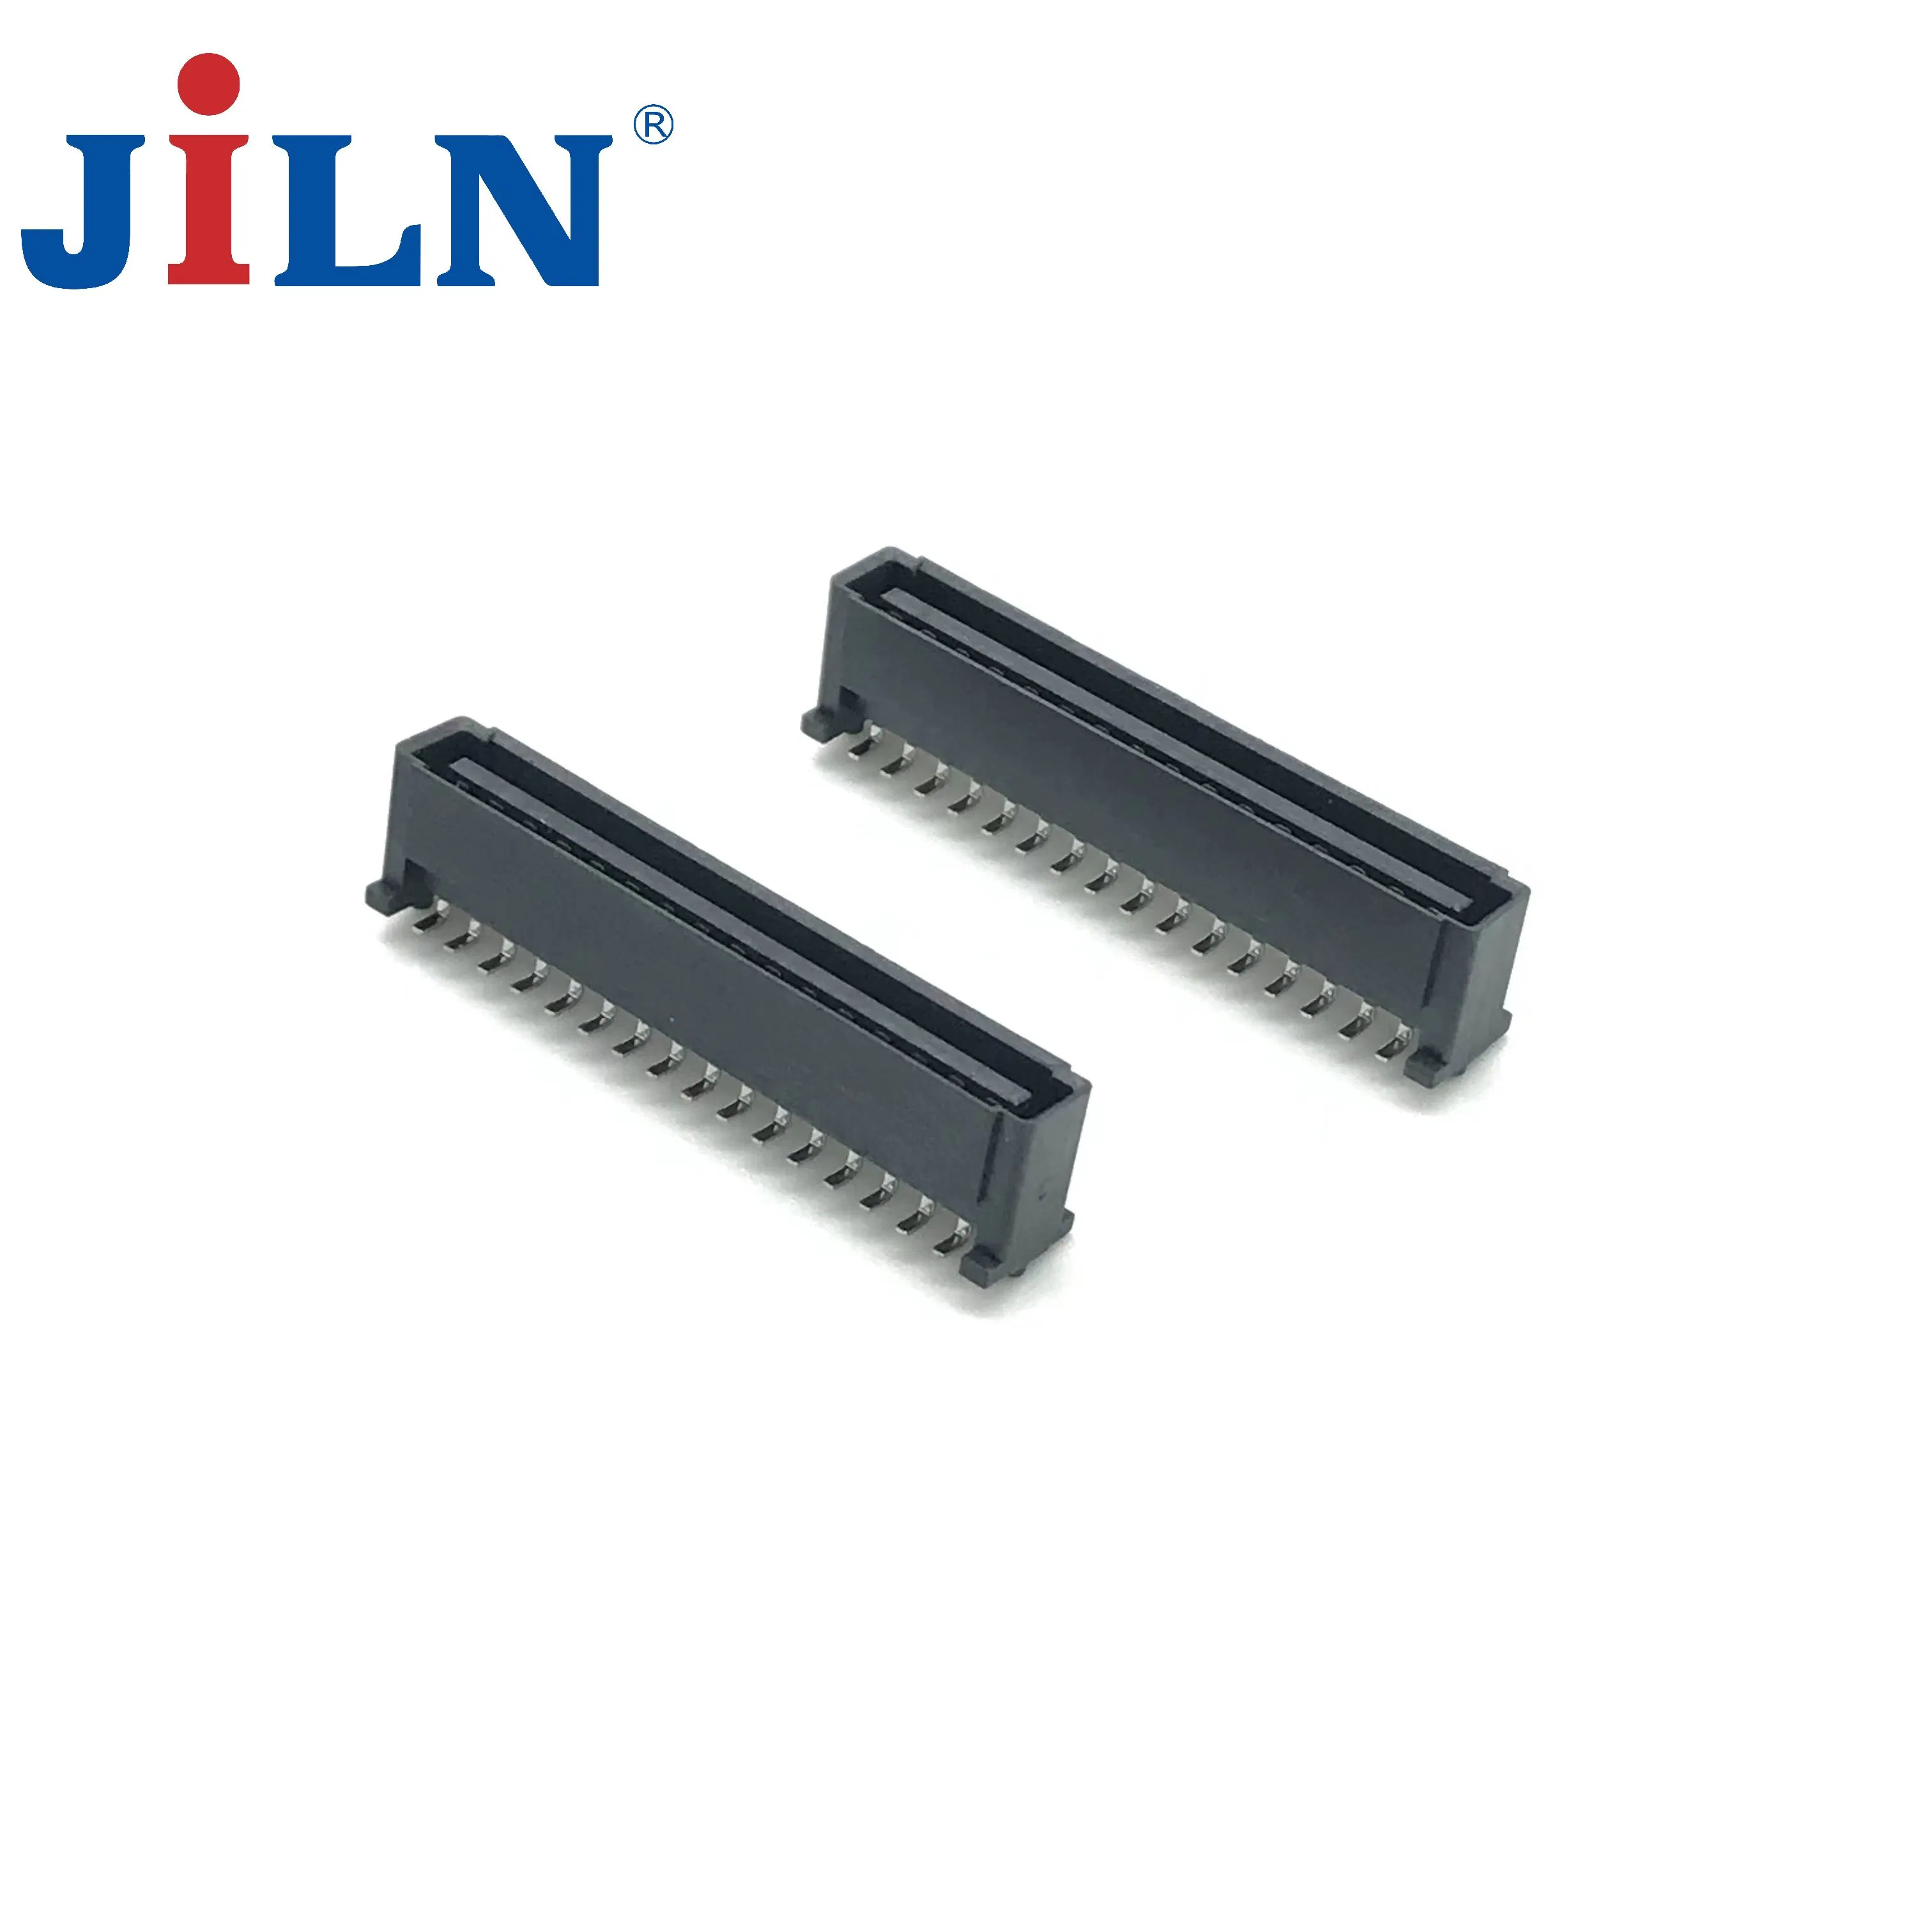 Jiln 1.0mm Board to Board Connector Common General Type Male H3.7mm 2X20p Heat Resistant PLC Custom LED Connector